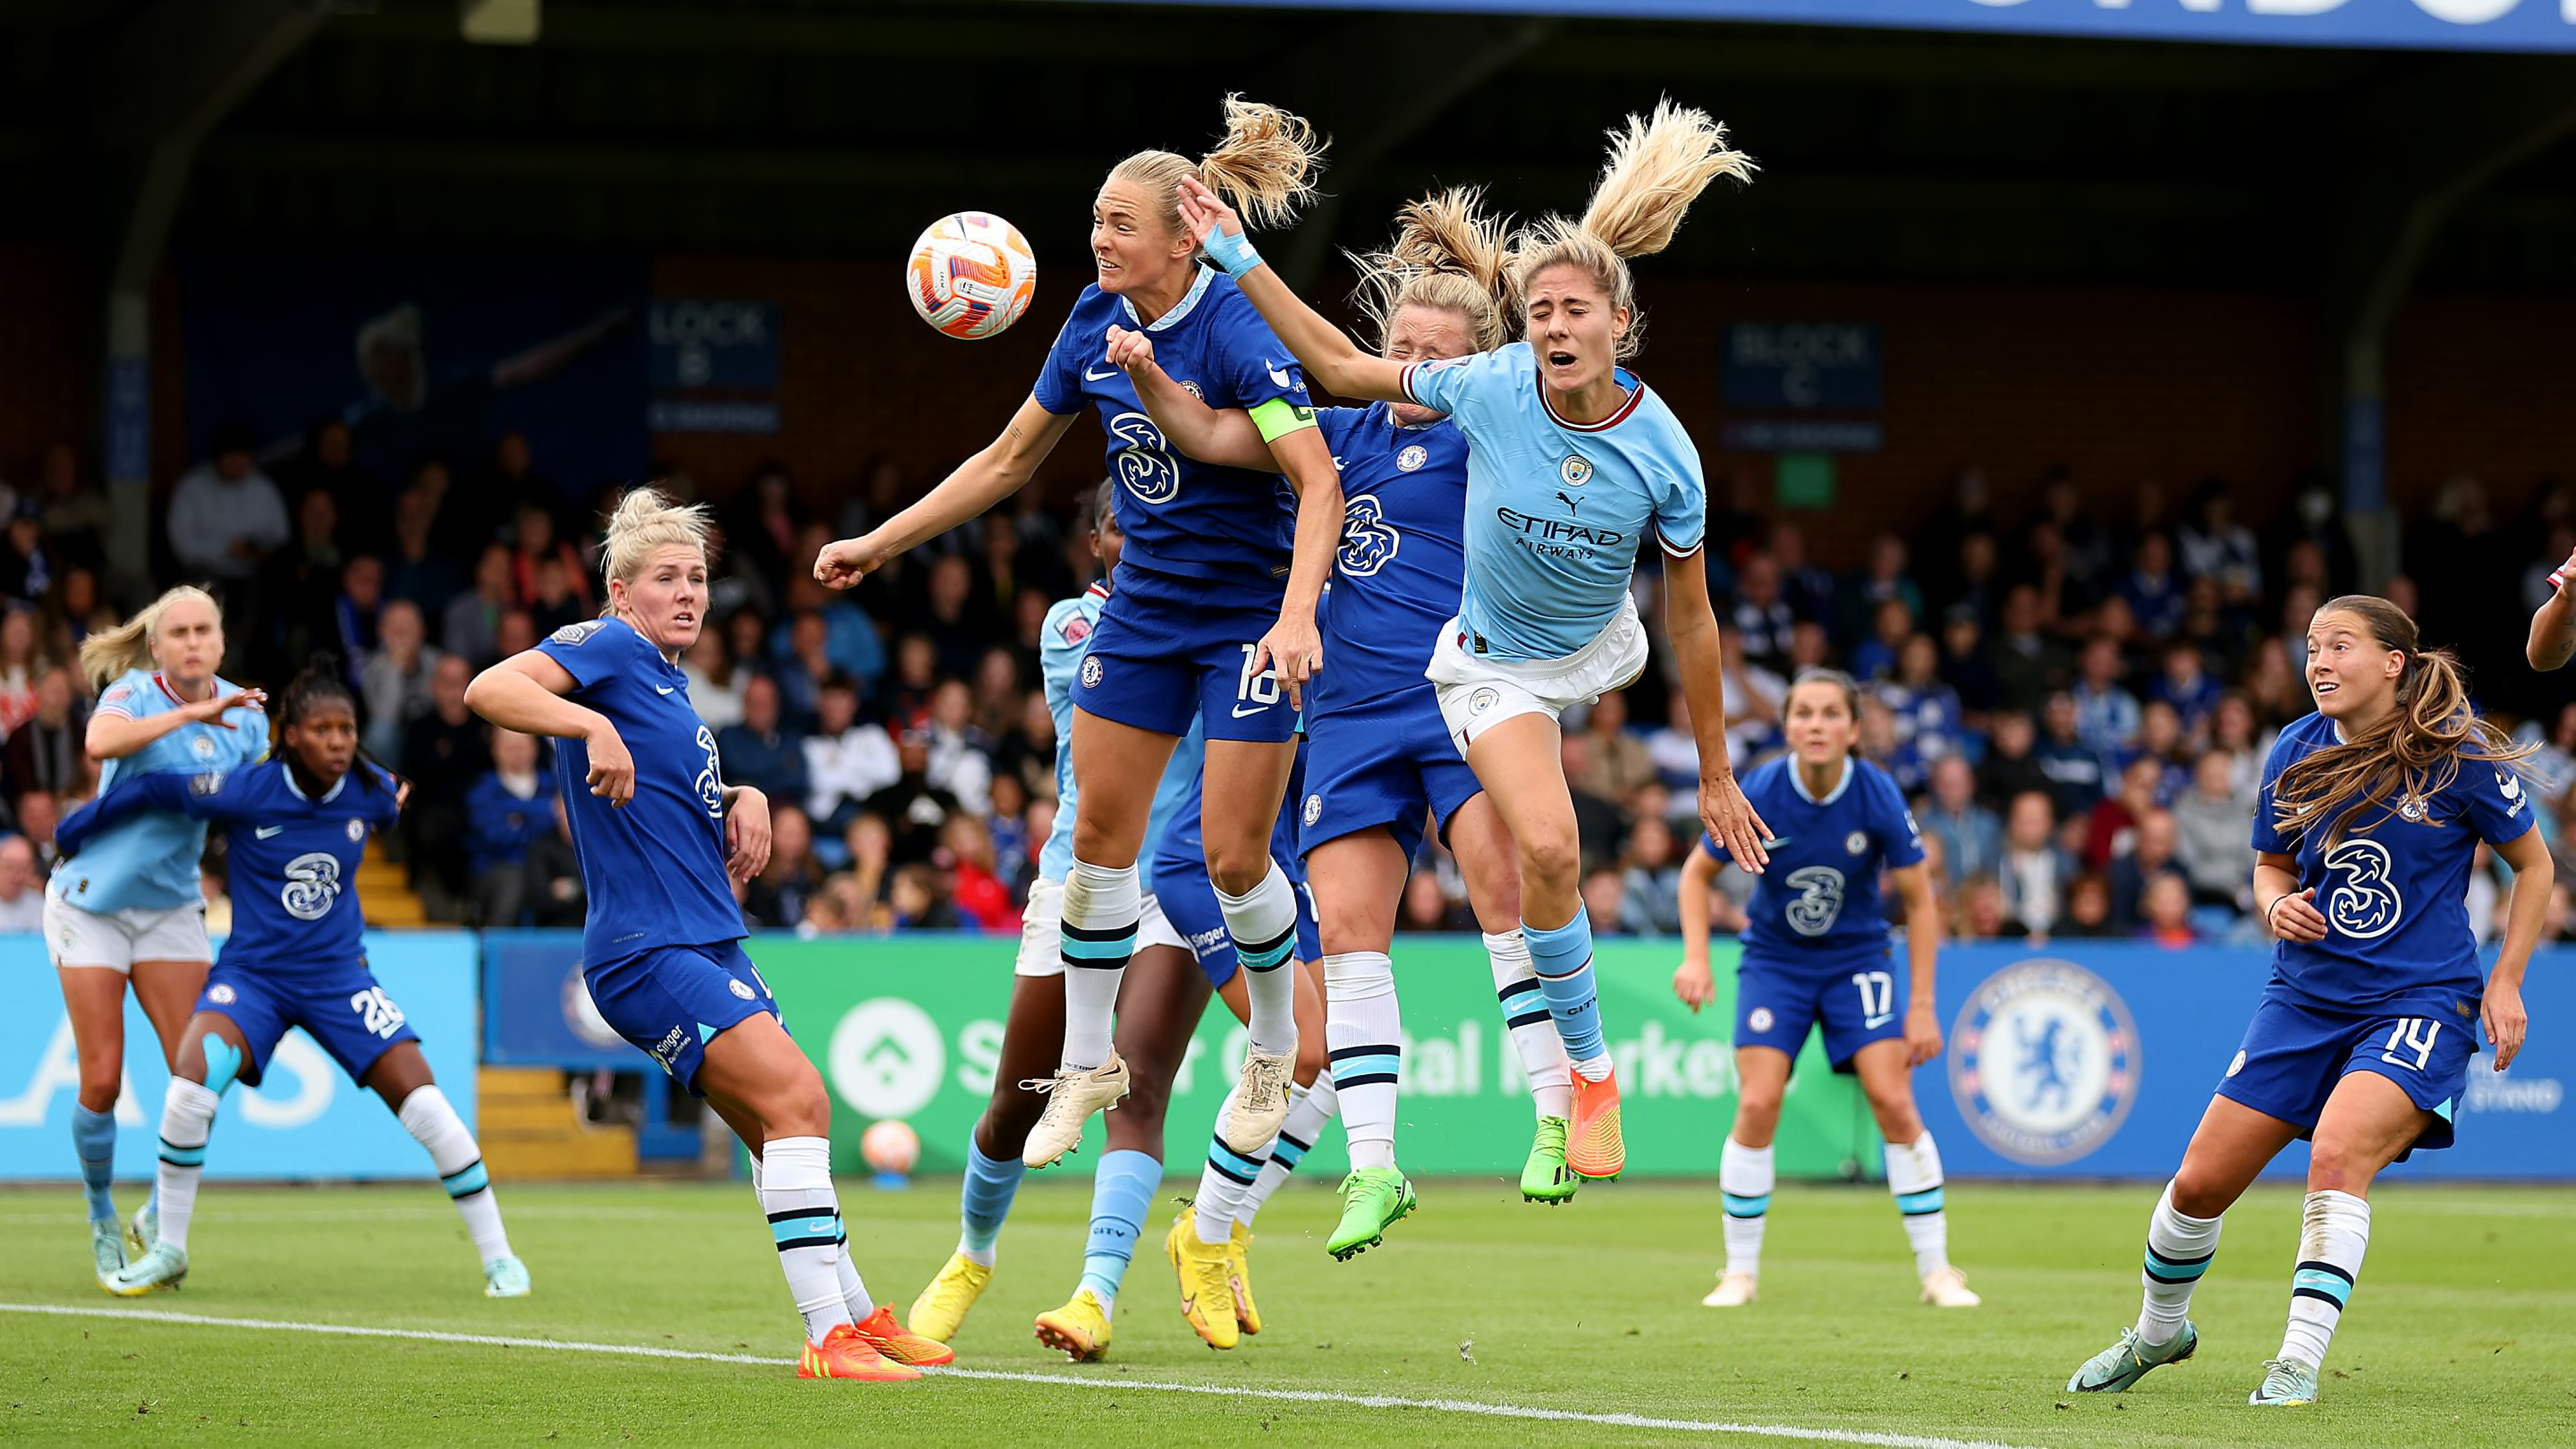 How to watch every WSL Women's Football Weekend game on TV